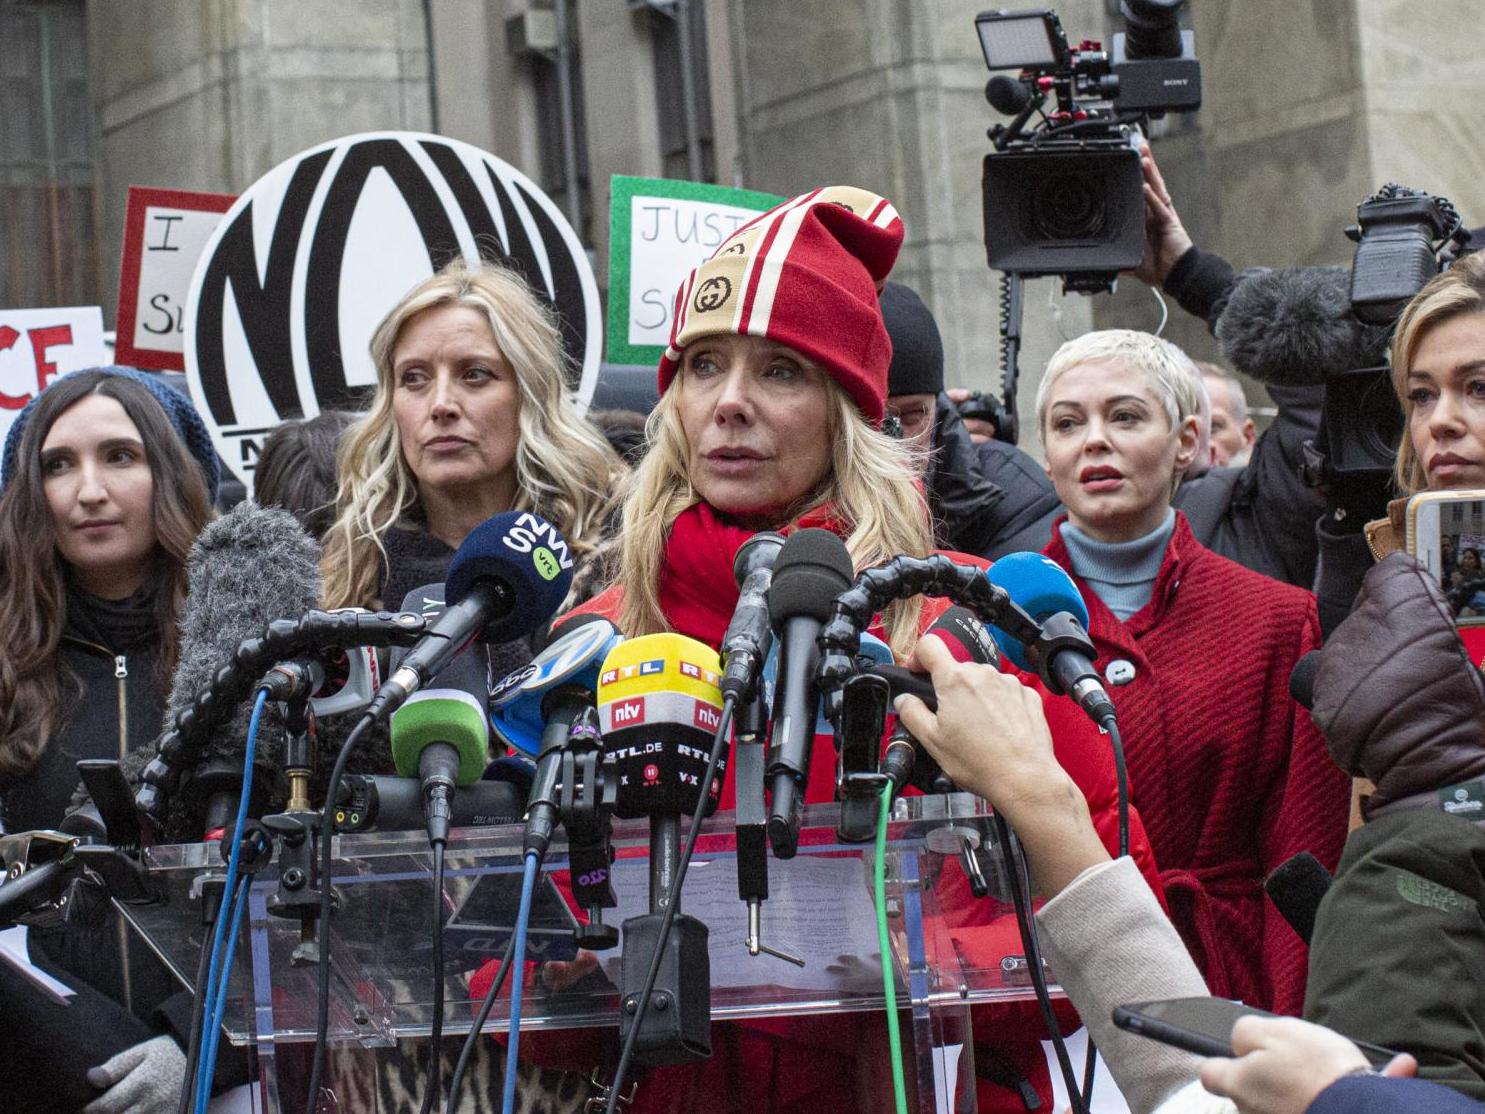 Weinstein accusers Rosanna Arquette and Rose McGowan (centre and left) speak to the media outside of Weinstein’s trial in January (Kena Betancur/Getty)